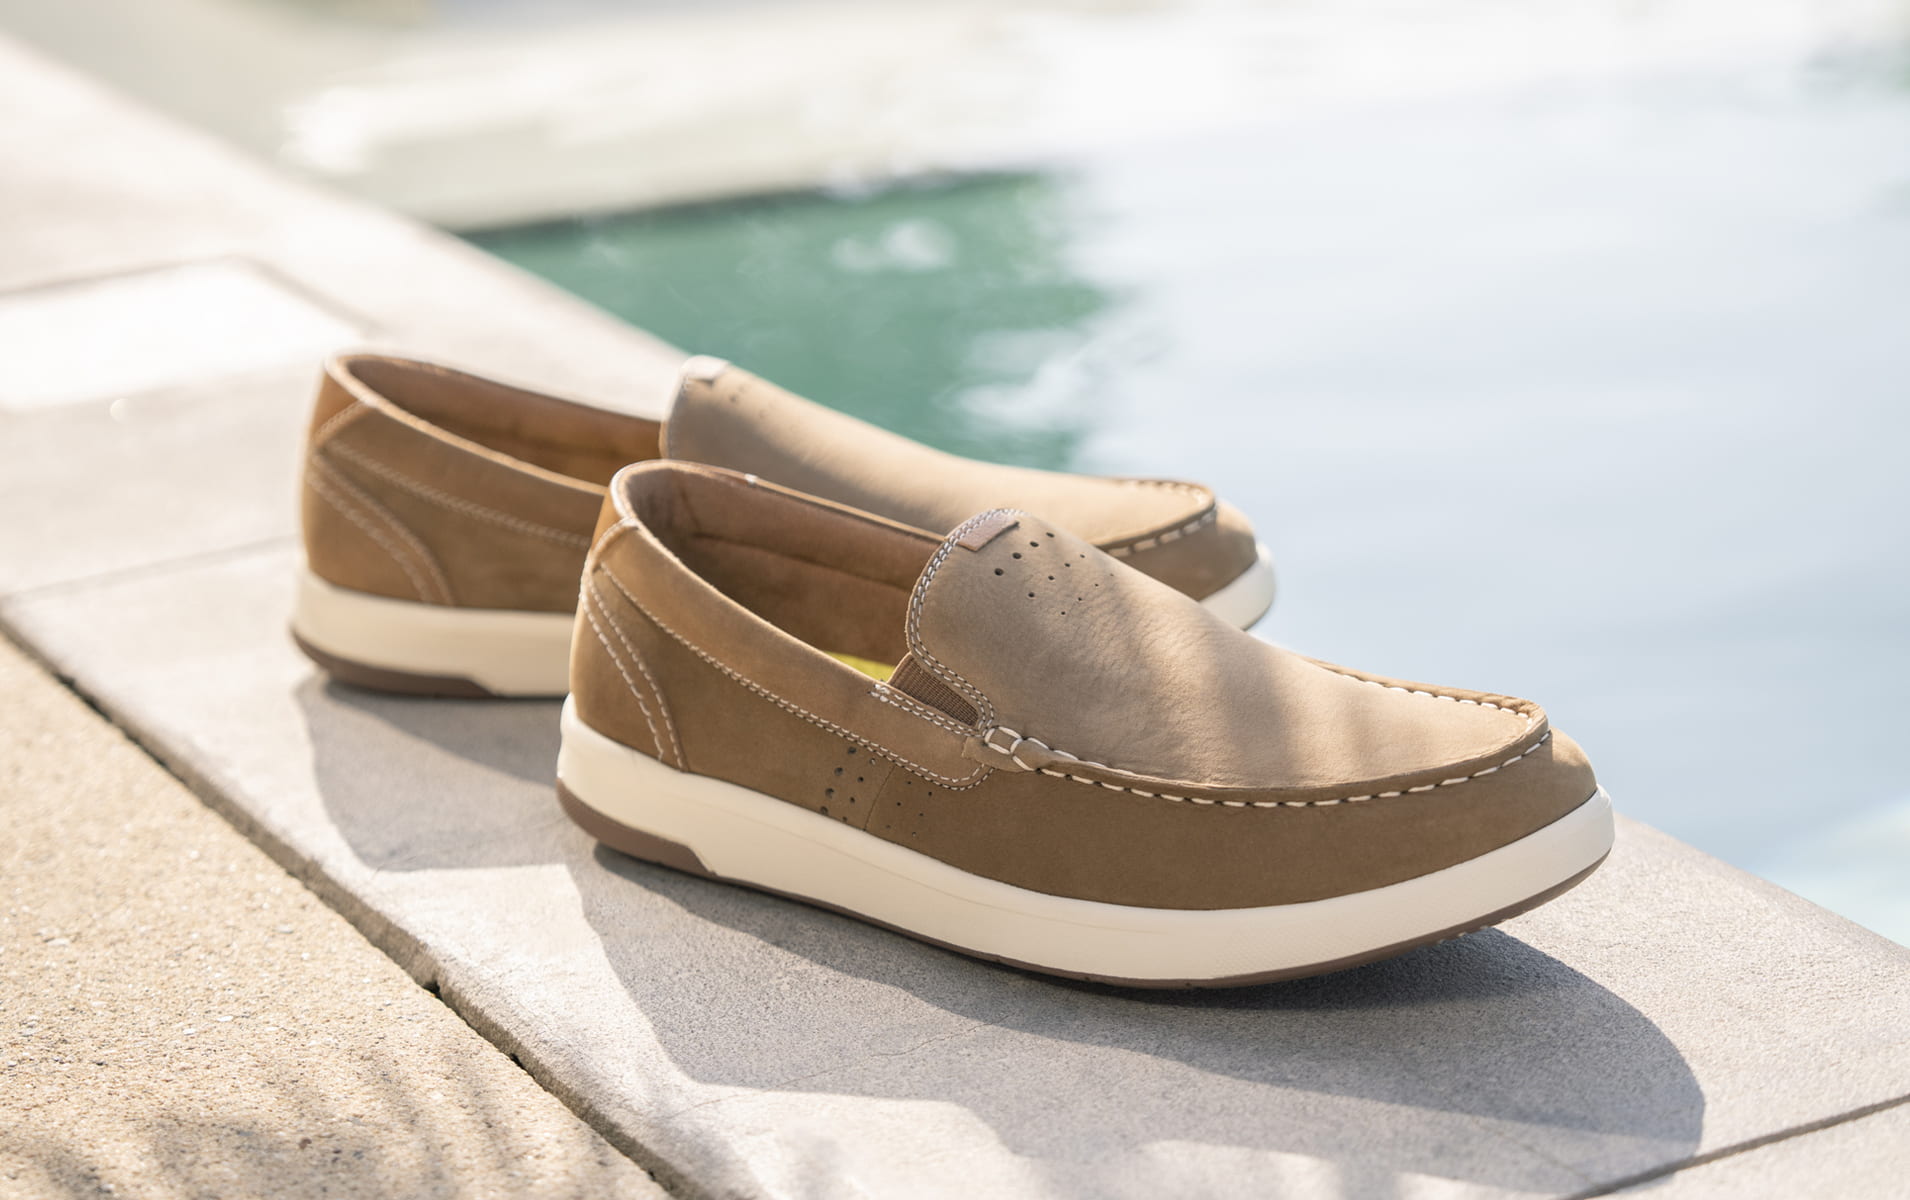 Florsheim casual category featuring the Crossover Moc Toe Slip On Sneaker by a pool.